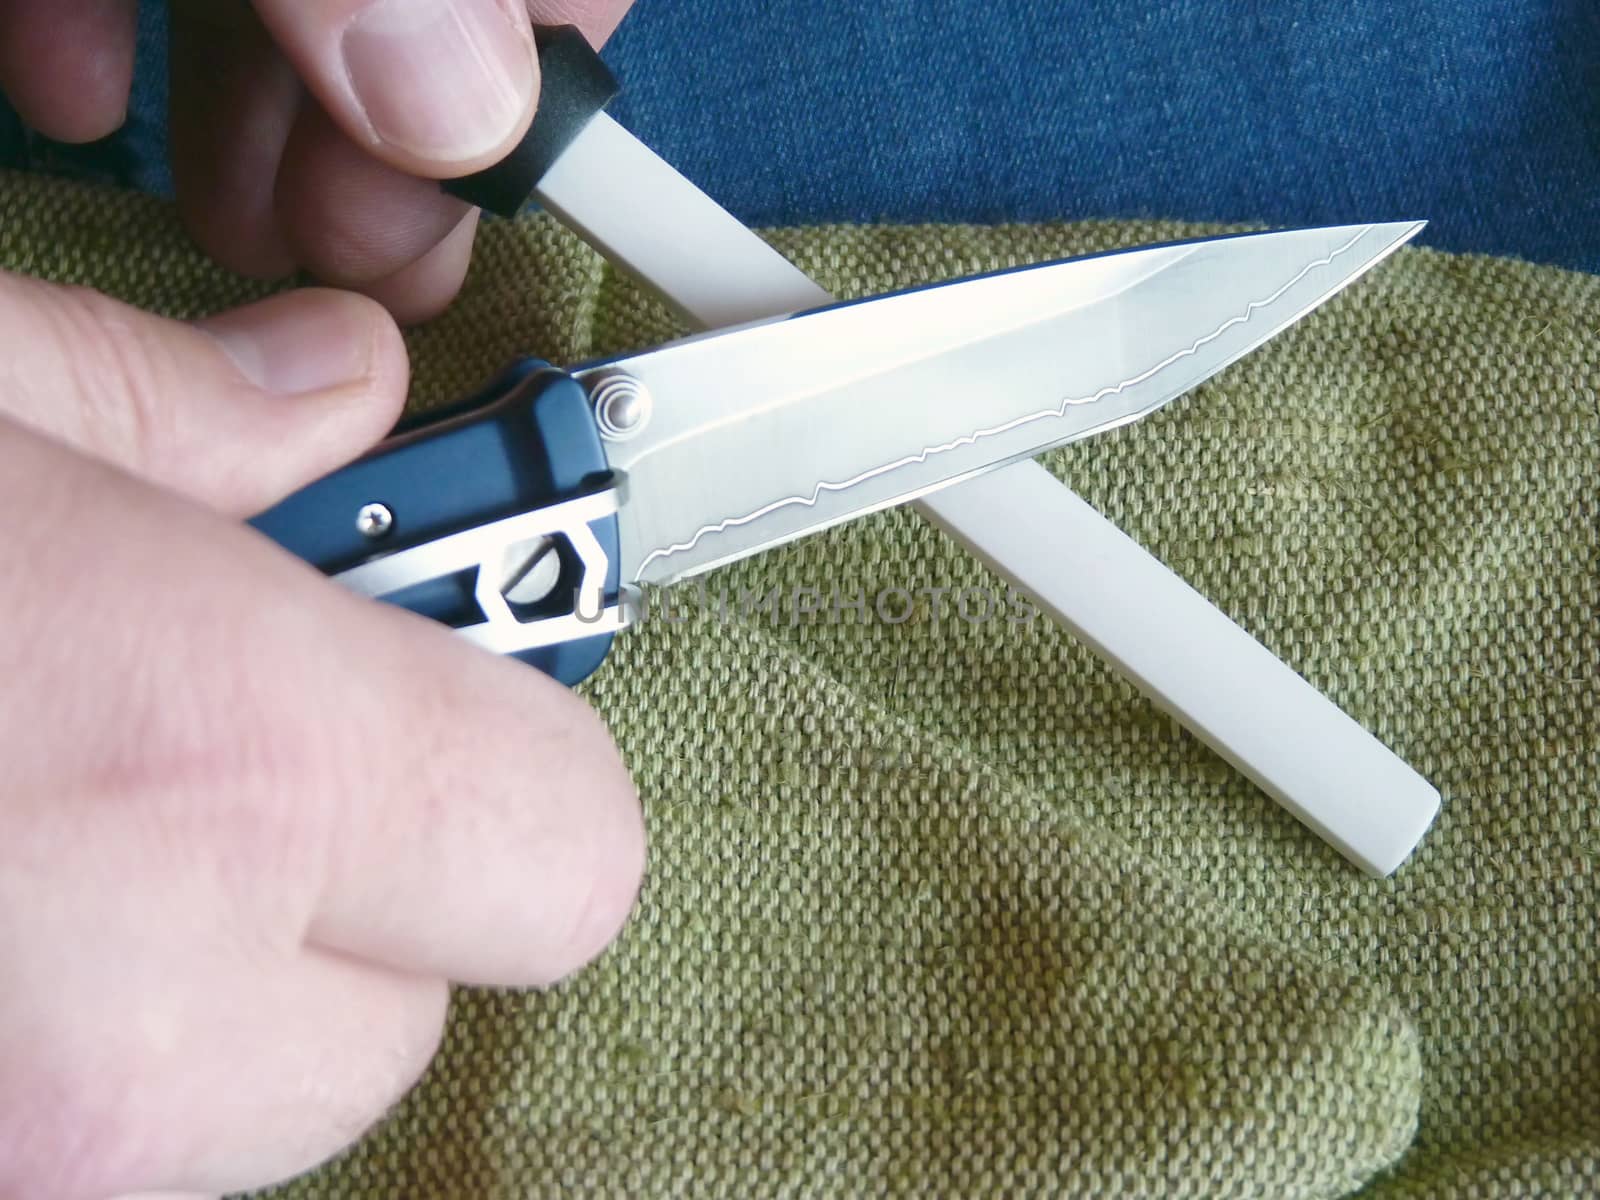 Sharpening of a small penknife on a ceramic musat